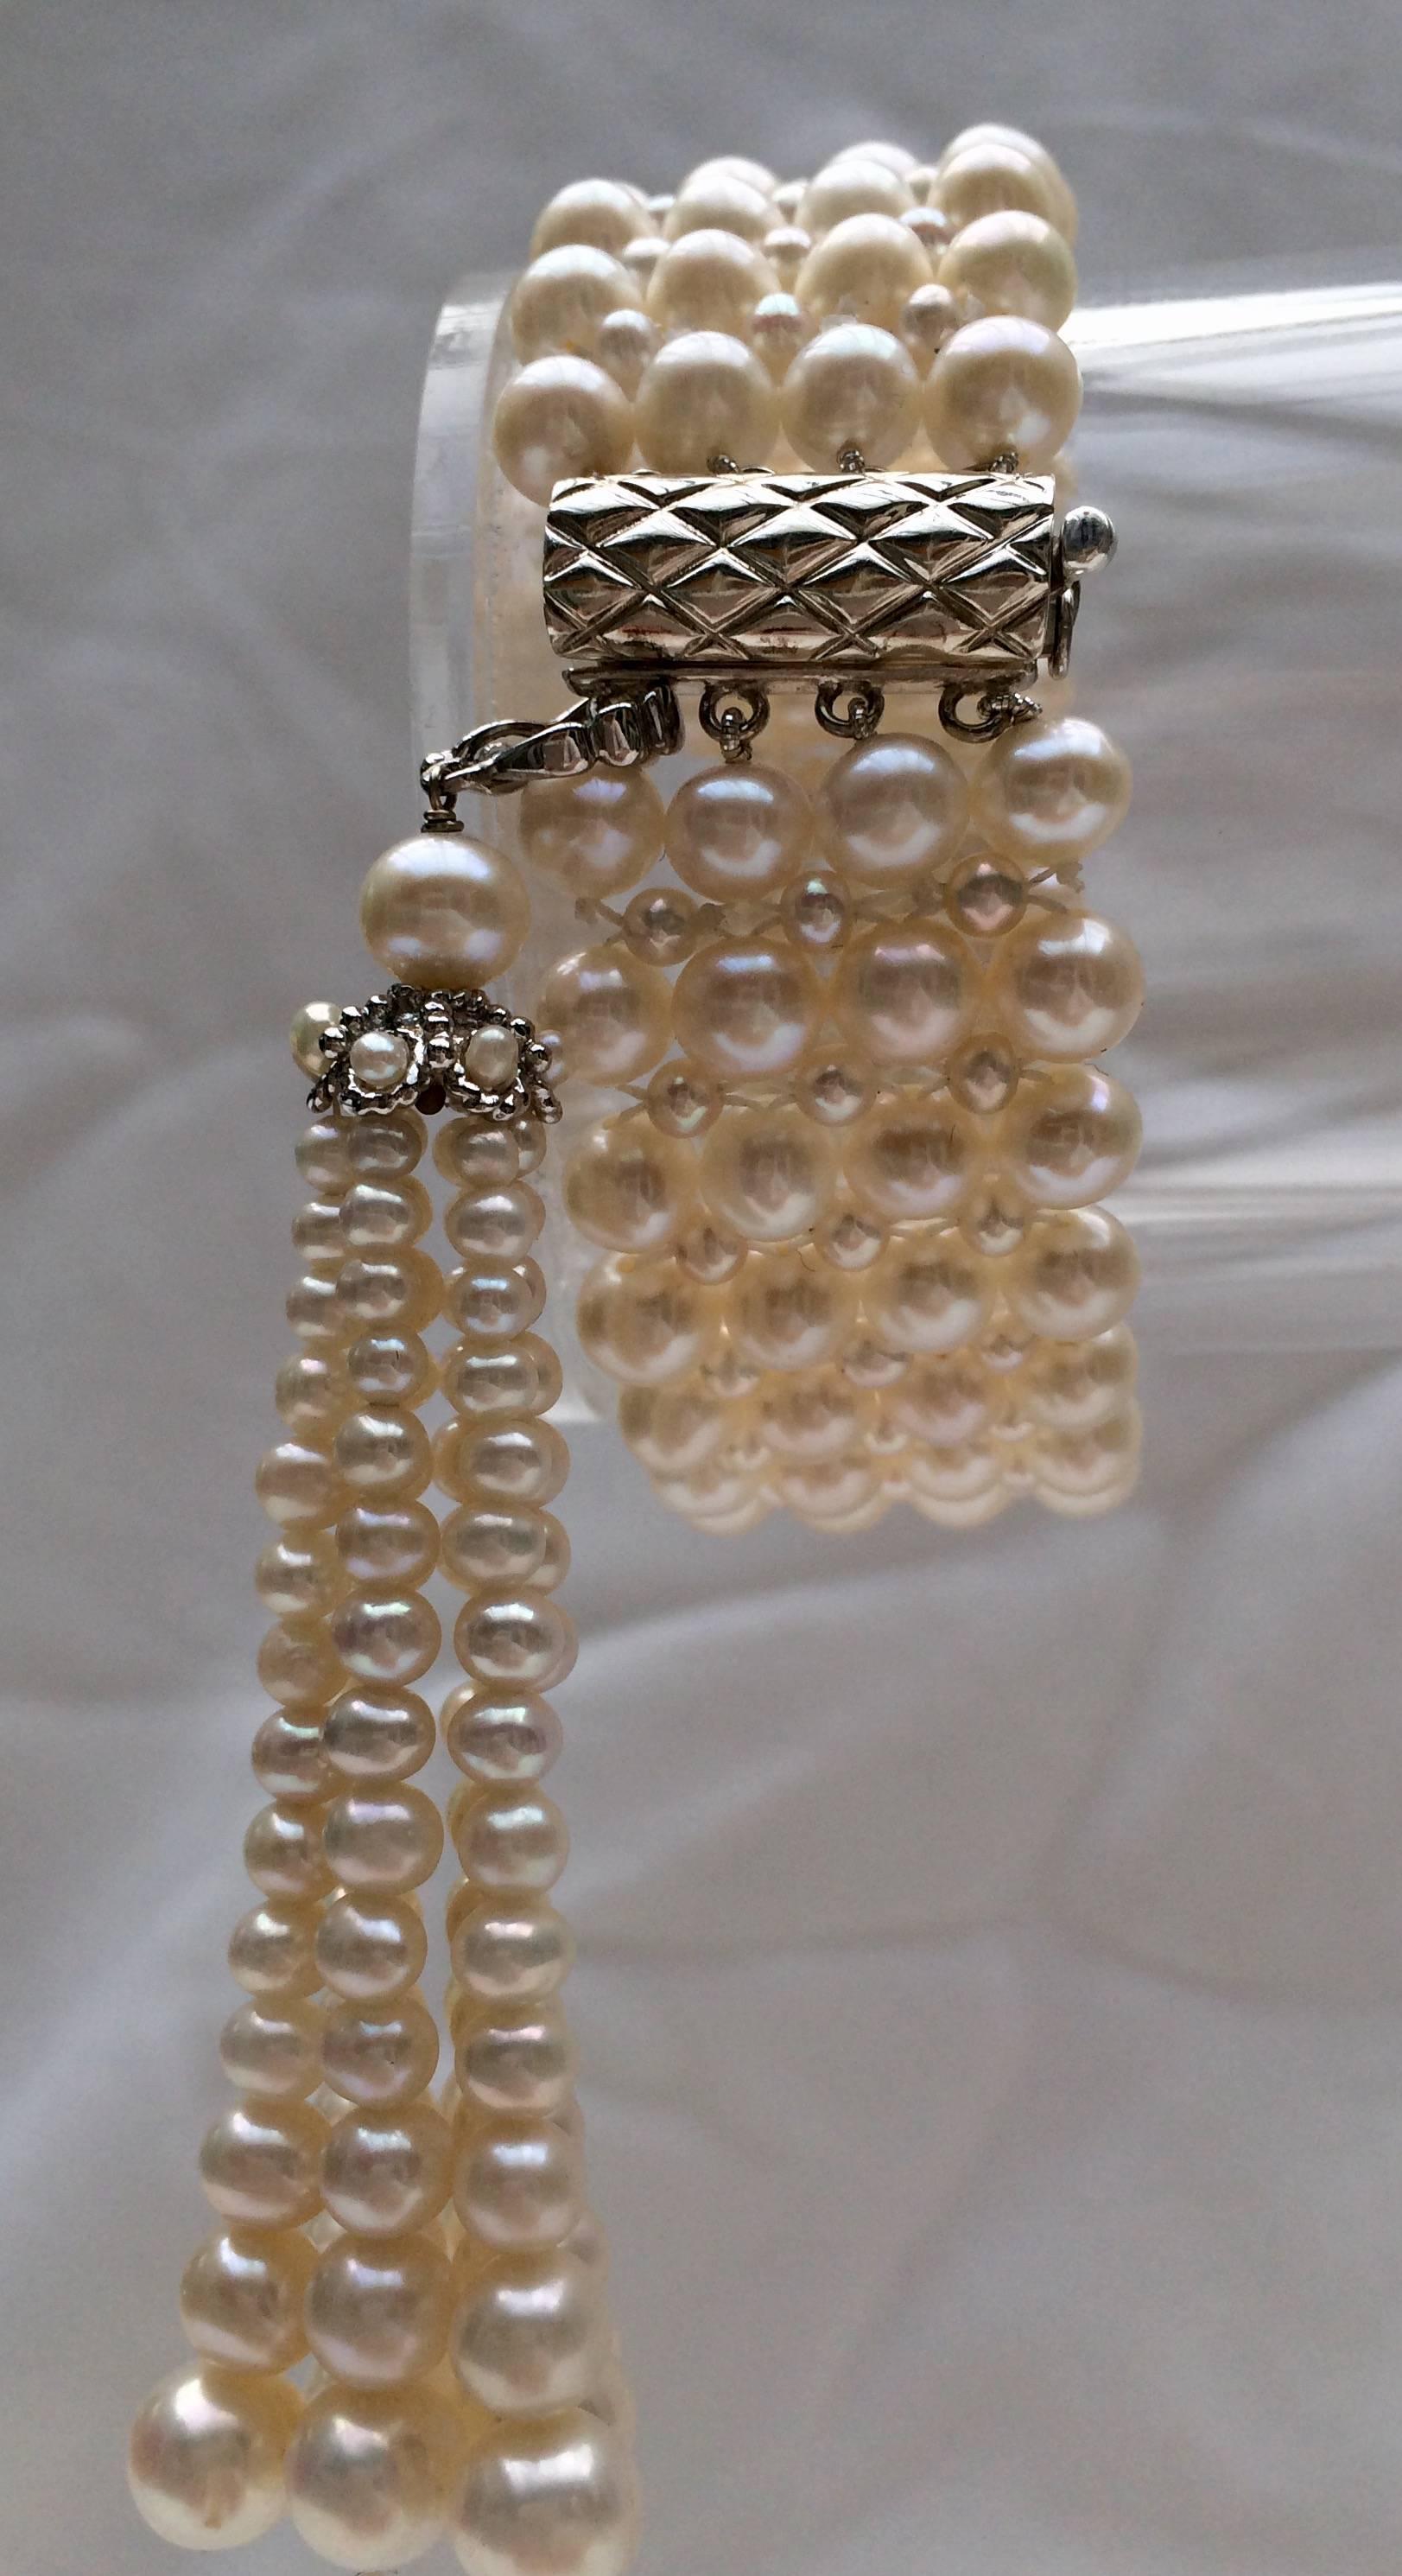 Bead  Woven Pearl Art Deco Bracelet with Removable Matching Pearl Tassel by Marina J